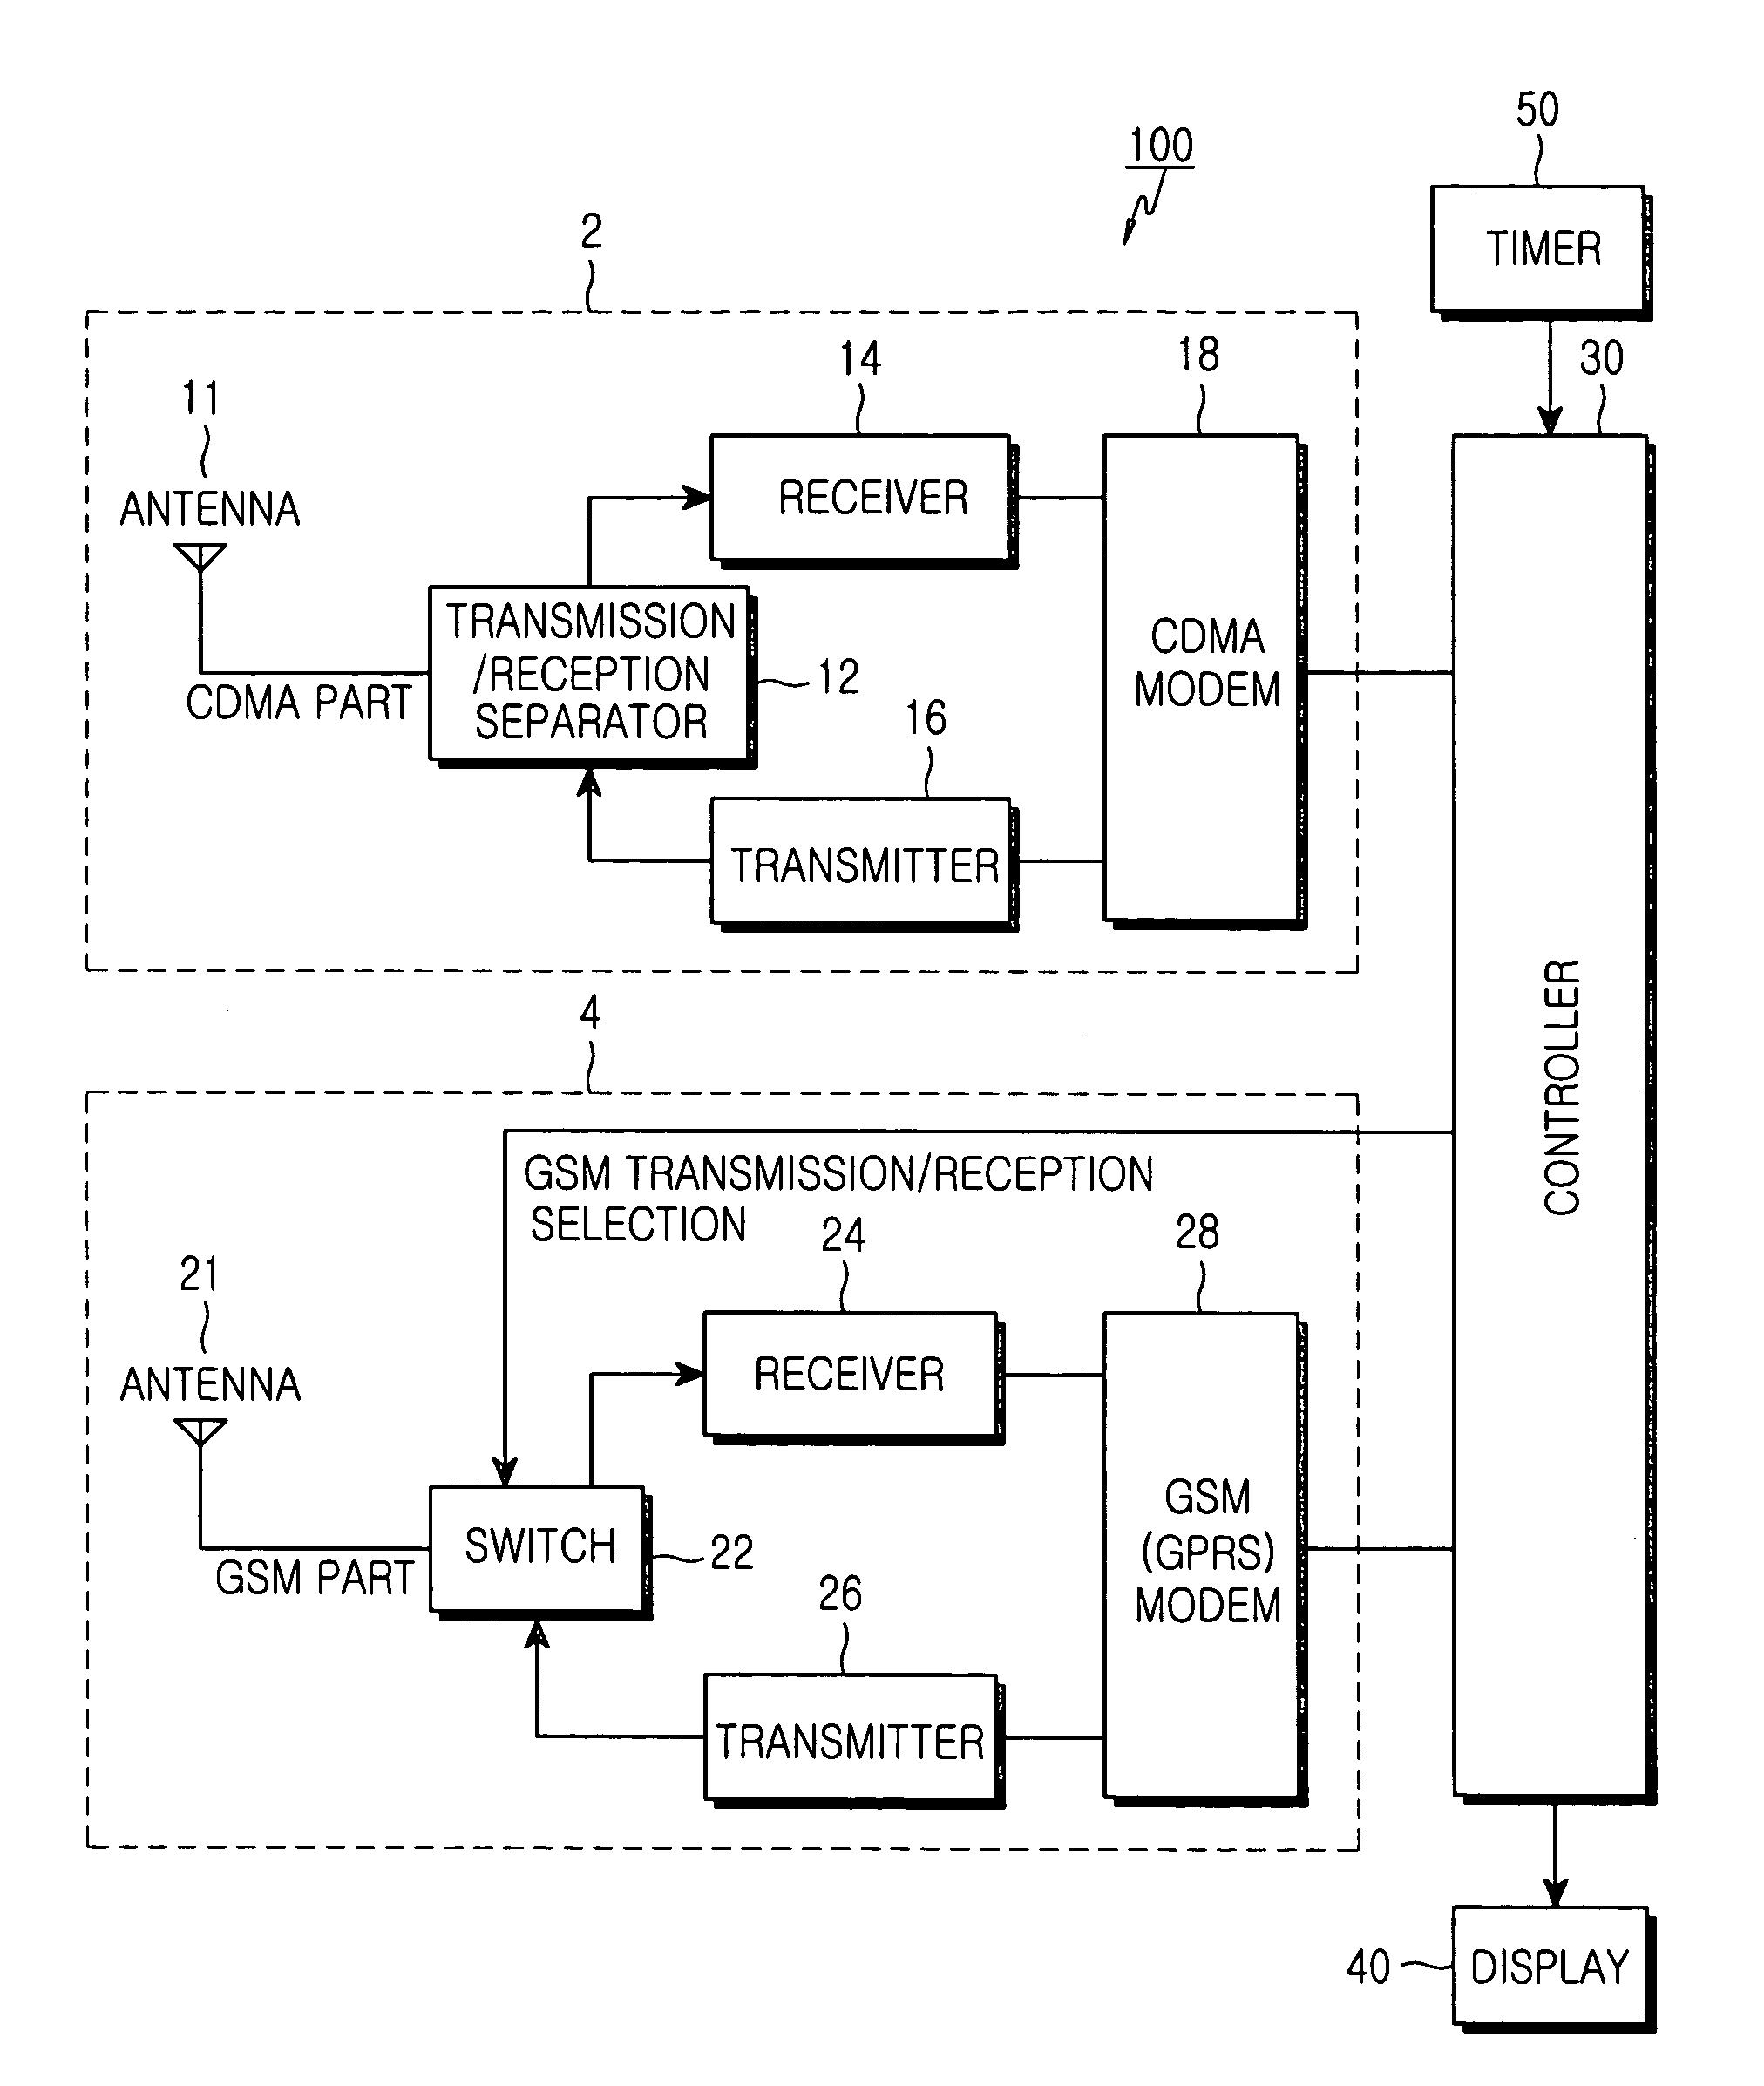 Dual-mode mobile terminal and method for displaying time information